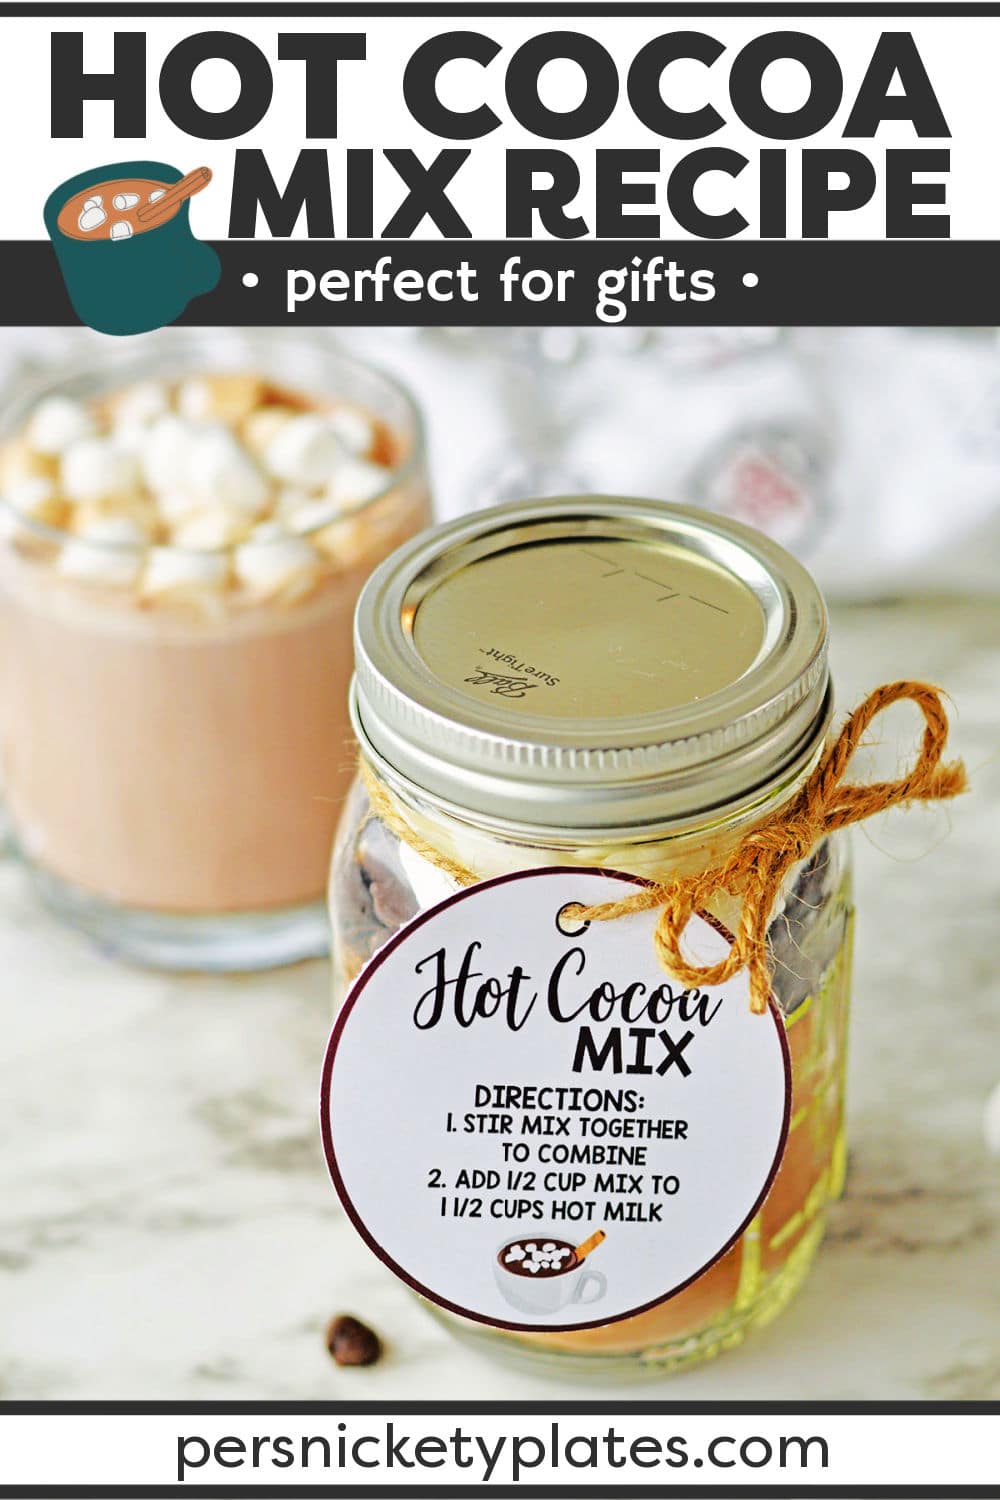 Give the gift of a homemade hot cocoa mix this holiday season! Make it with a handful of pantry staples, store it in a jar and use the printable gift tag provided with instructions. A super cute way for you and your loved ones to enjoy a rich cup of hot cocoa at any time! | www.persnicketyplates.com